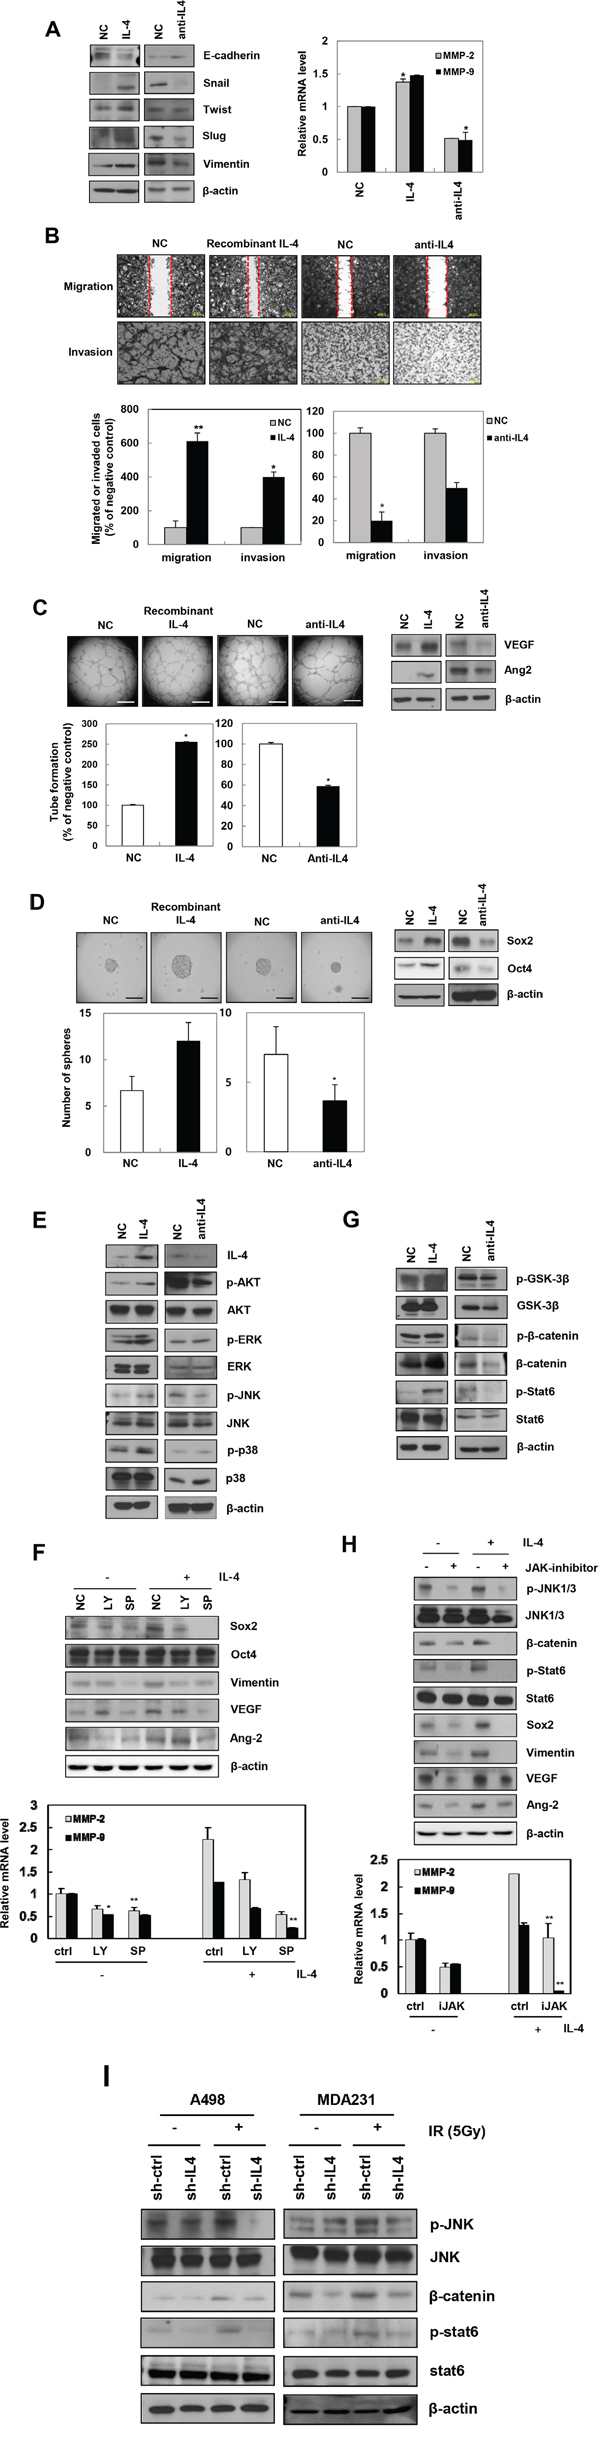 Recombinant IL-4 or neutralization of IL-4 using anti-IL-4 regulates EMT, migration, invasion, angiogenesis, and stemness in cancer cells.